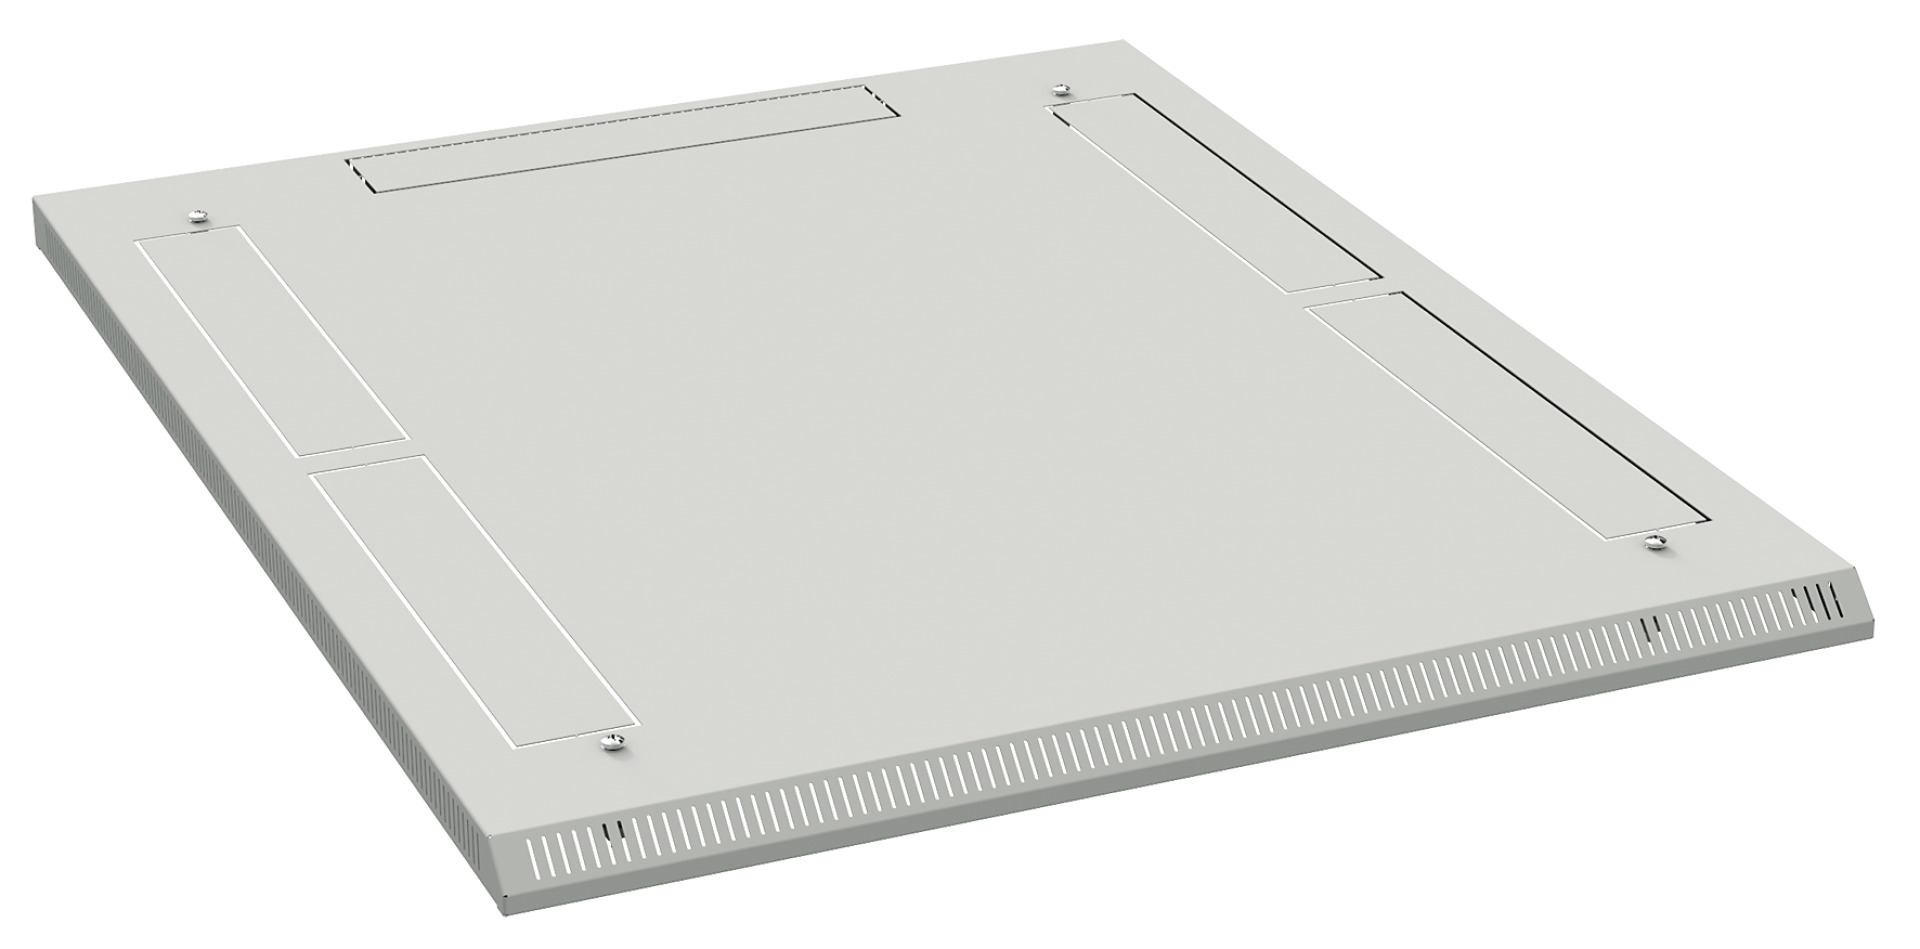 Additional Roof H=40 mm, 800x800 mm, RAL9005, for Cabinet Series PRO